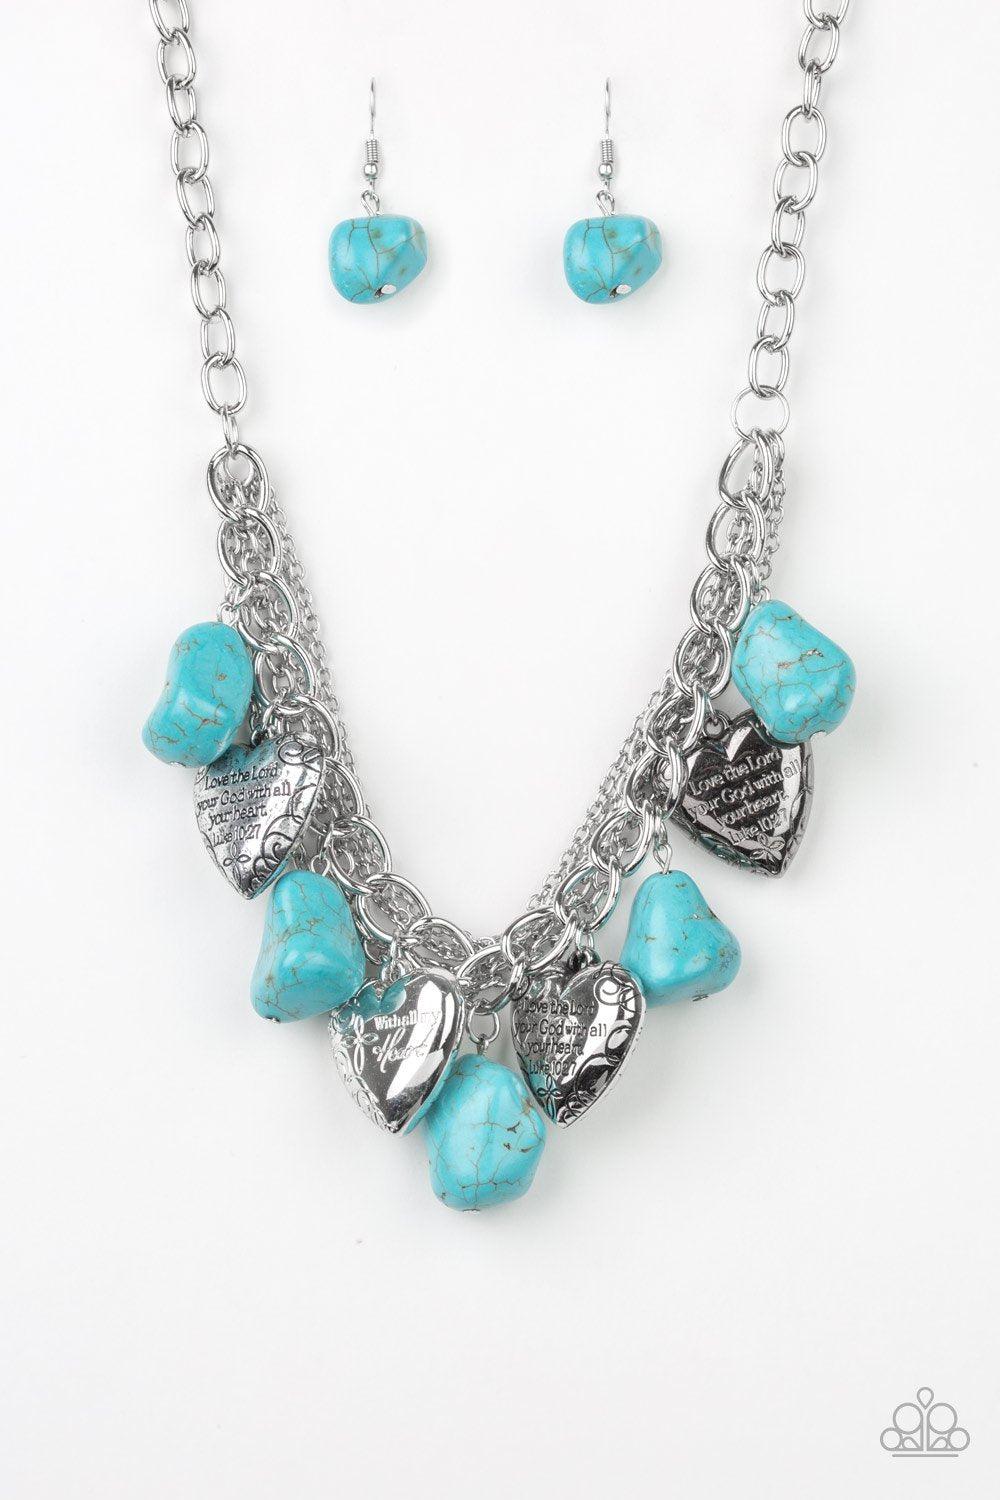 Change of Heart Turquoise Blue Stone and Silver Heart Necklace - Paparazzi Accessories- lightbox - CarasShop.com - $5 Jewelry by Cara Jewels